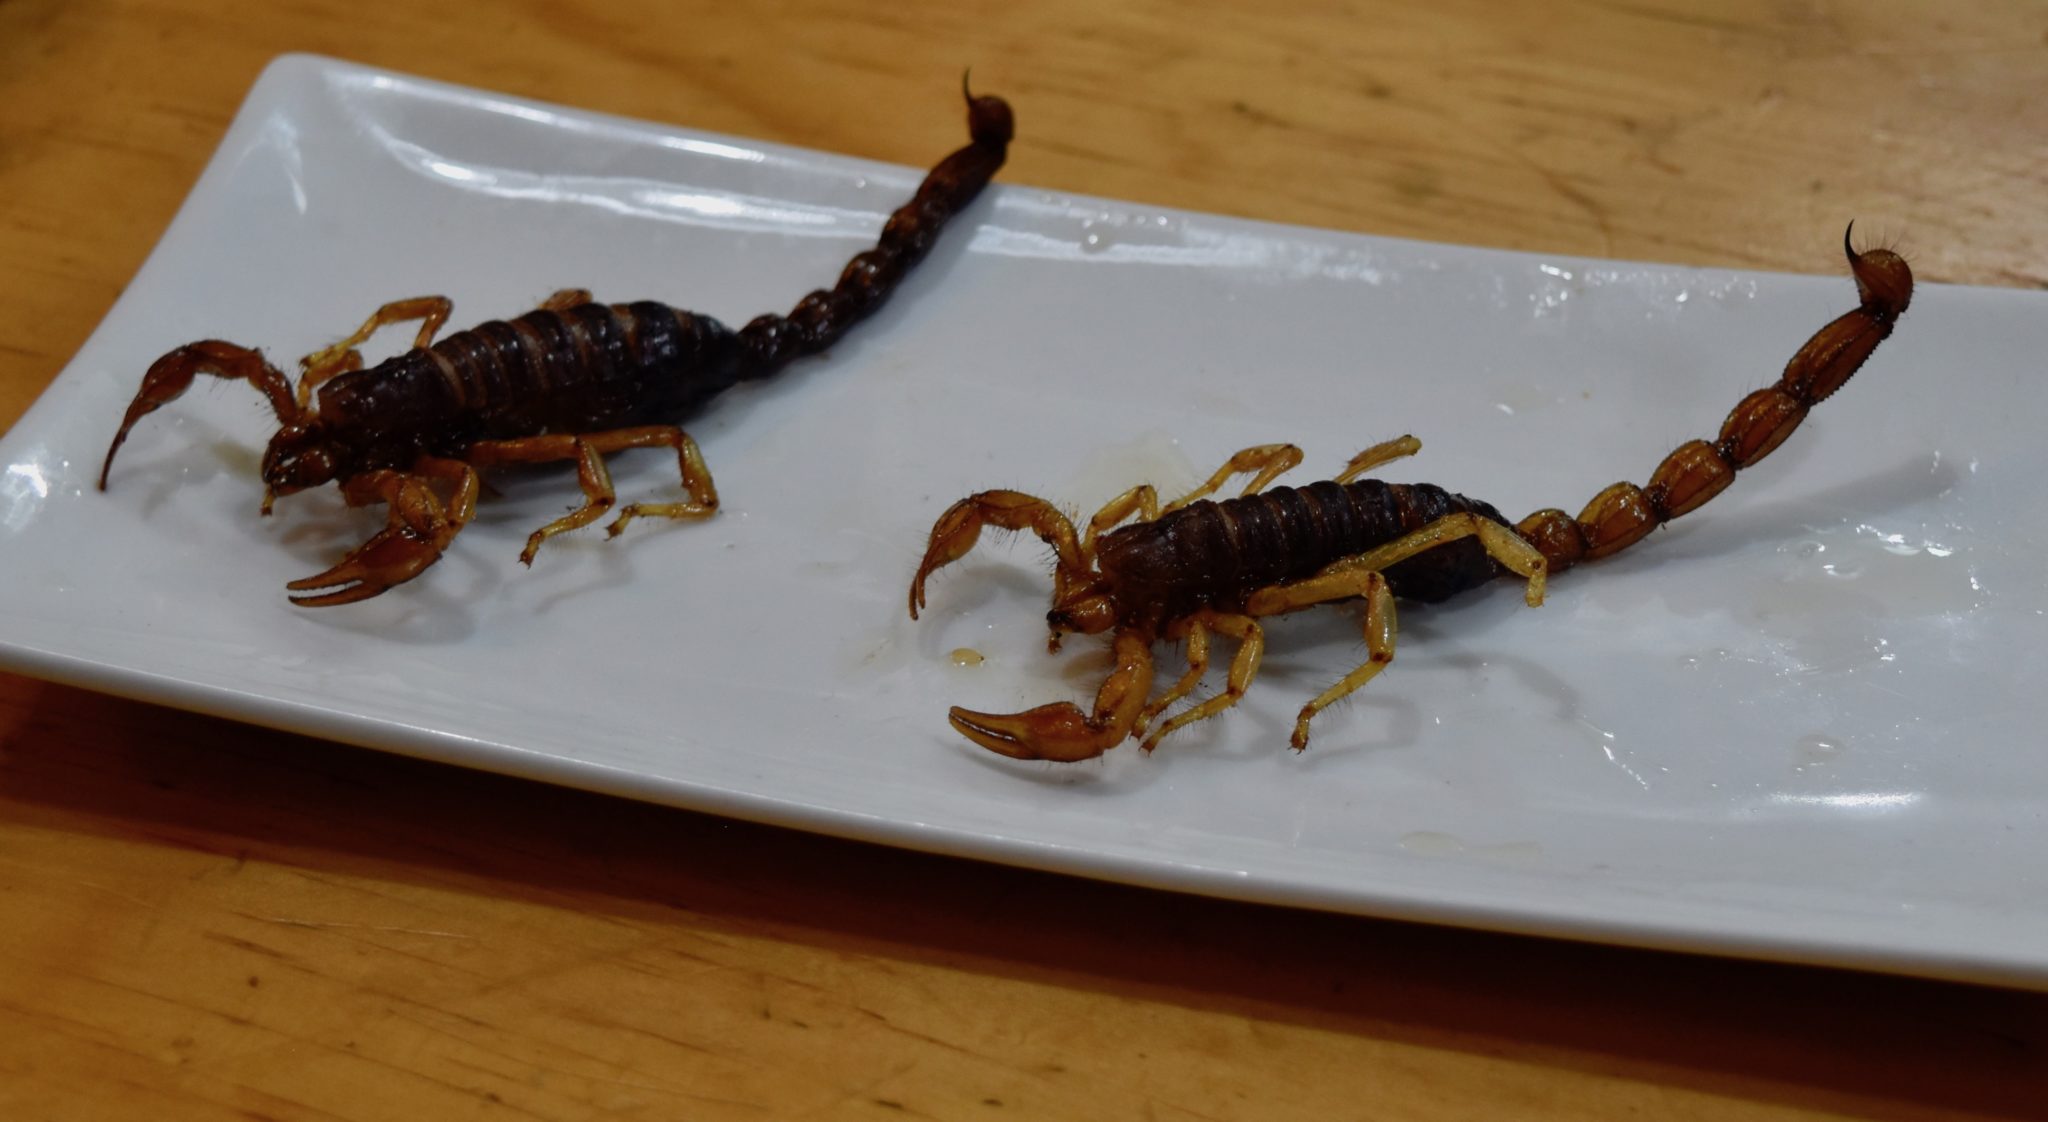 Two scorpions on a plate 